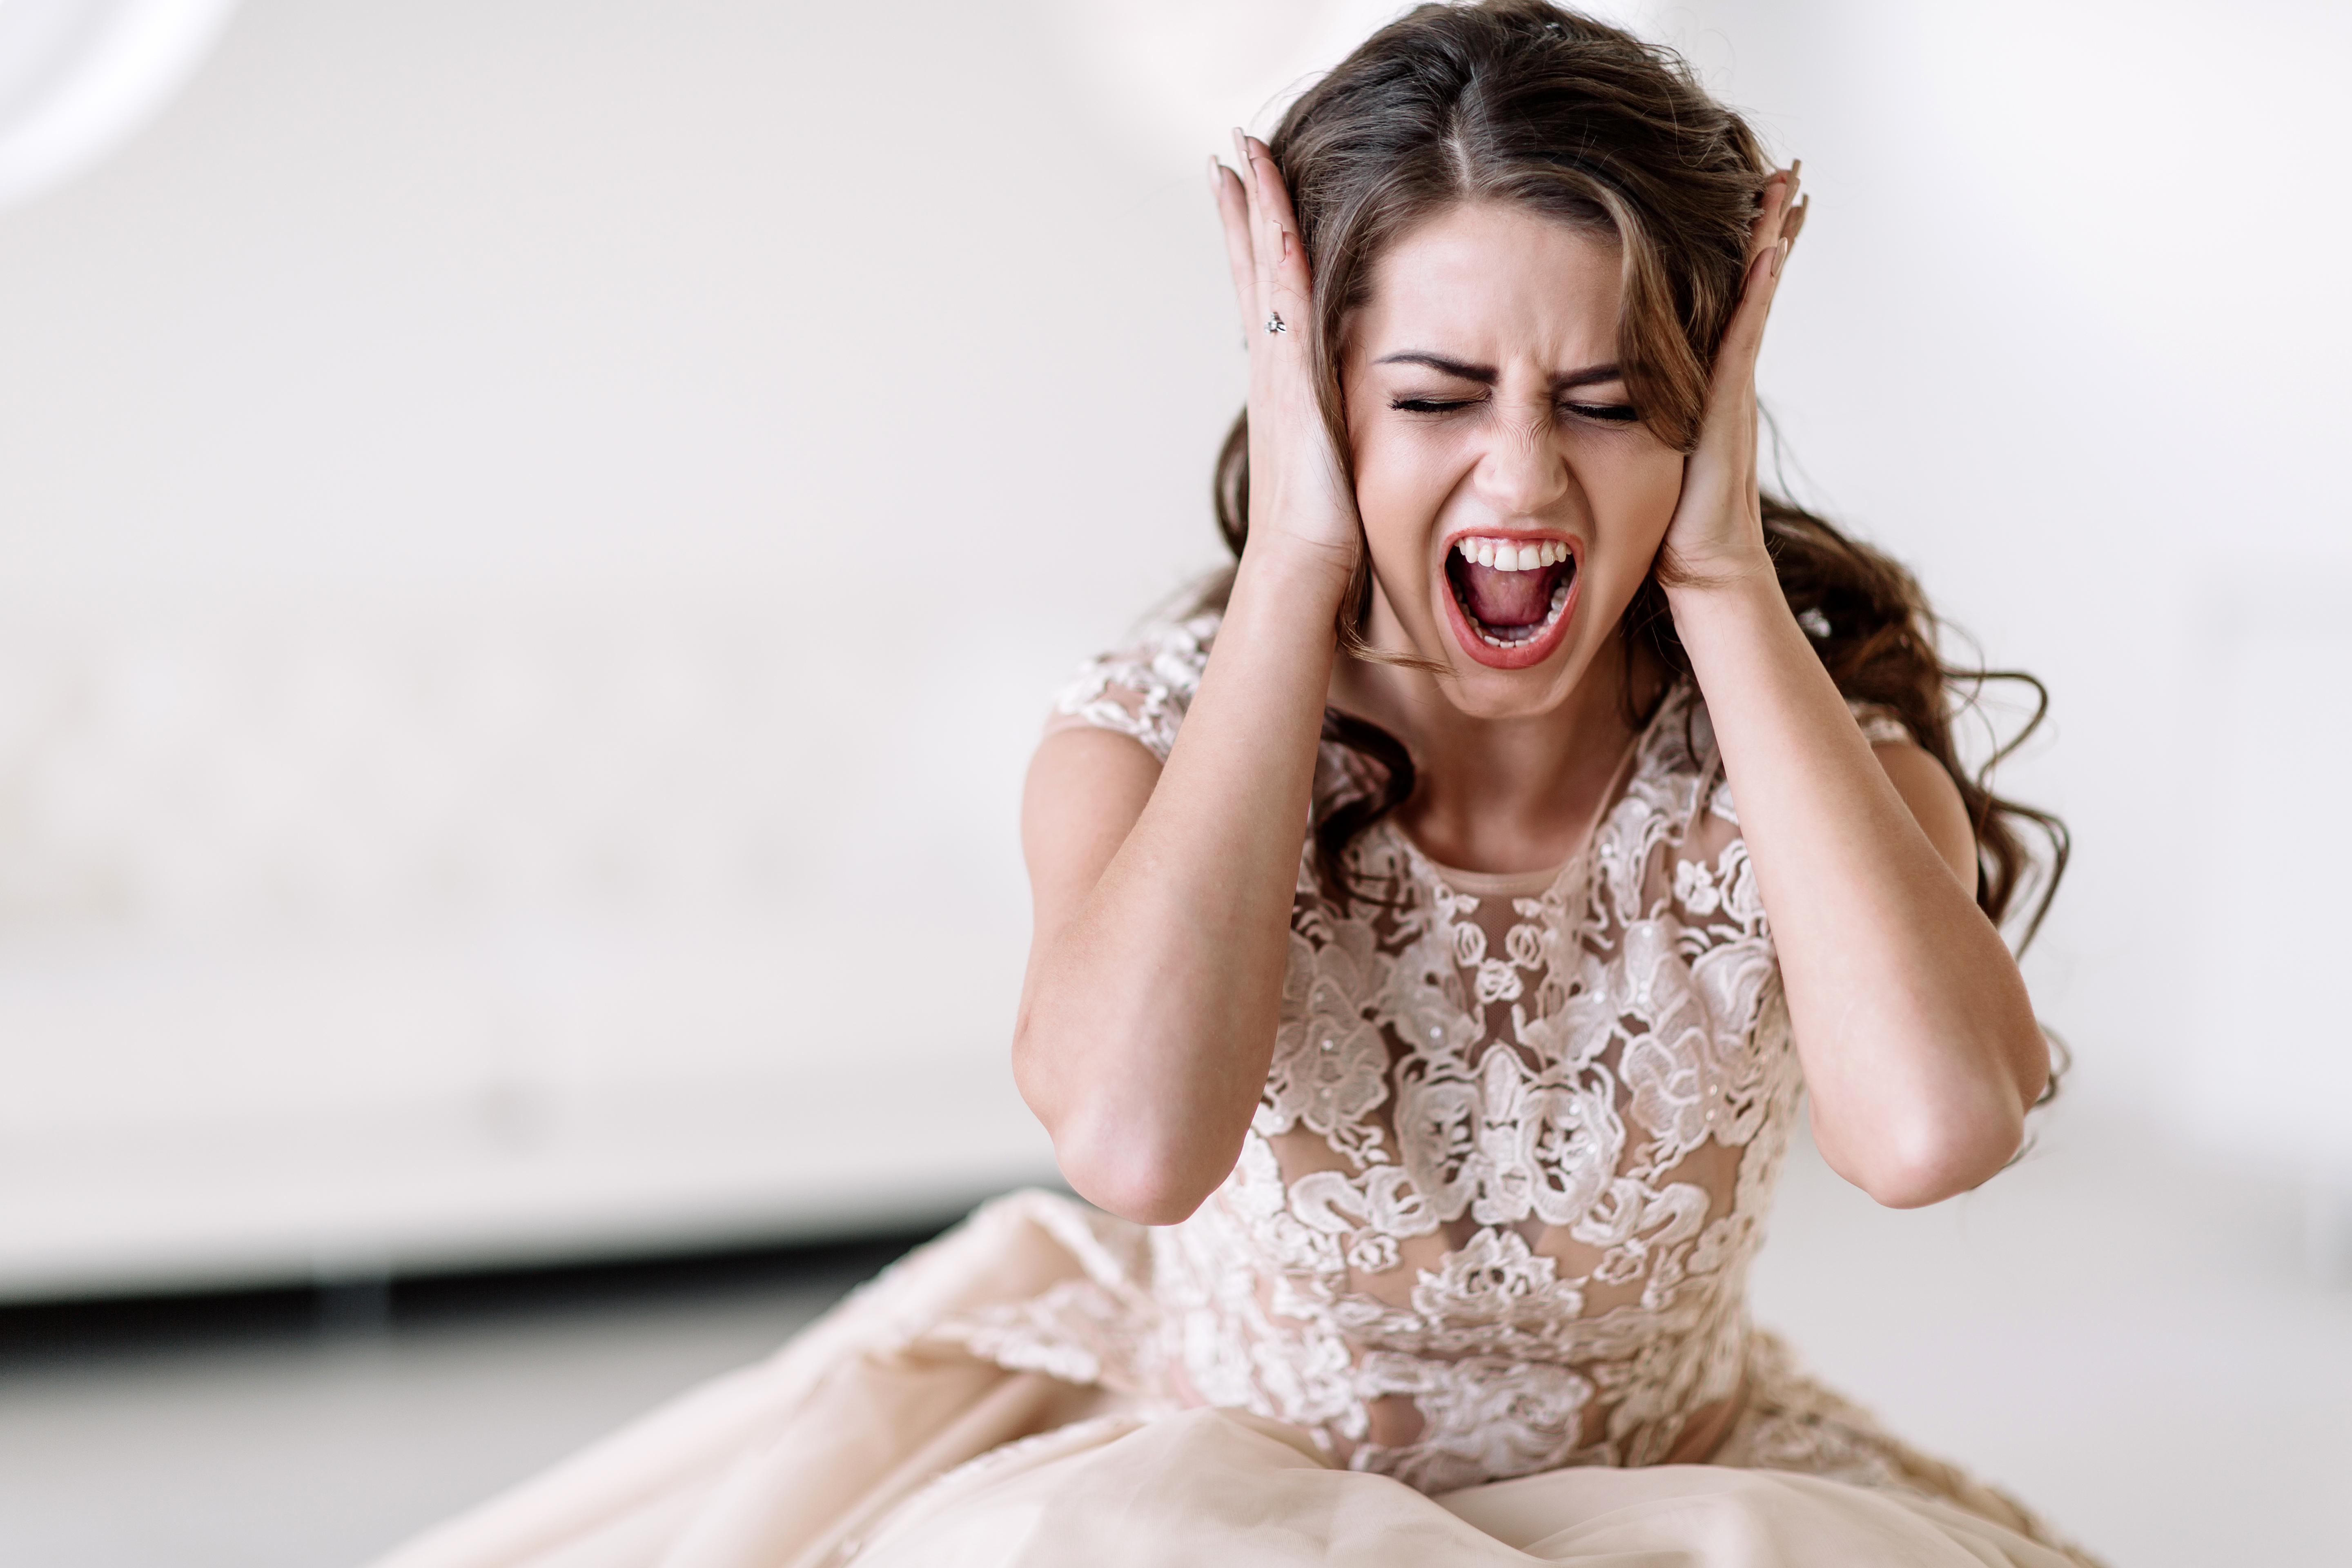 A bride screaming while sitting on the floor | Source: Shutterstock